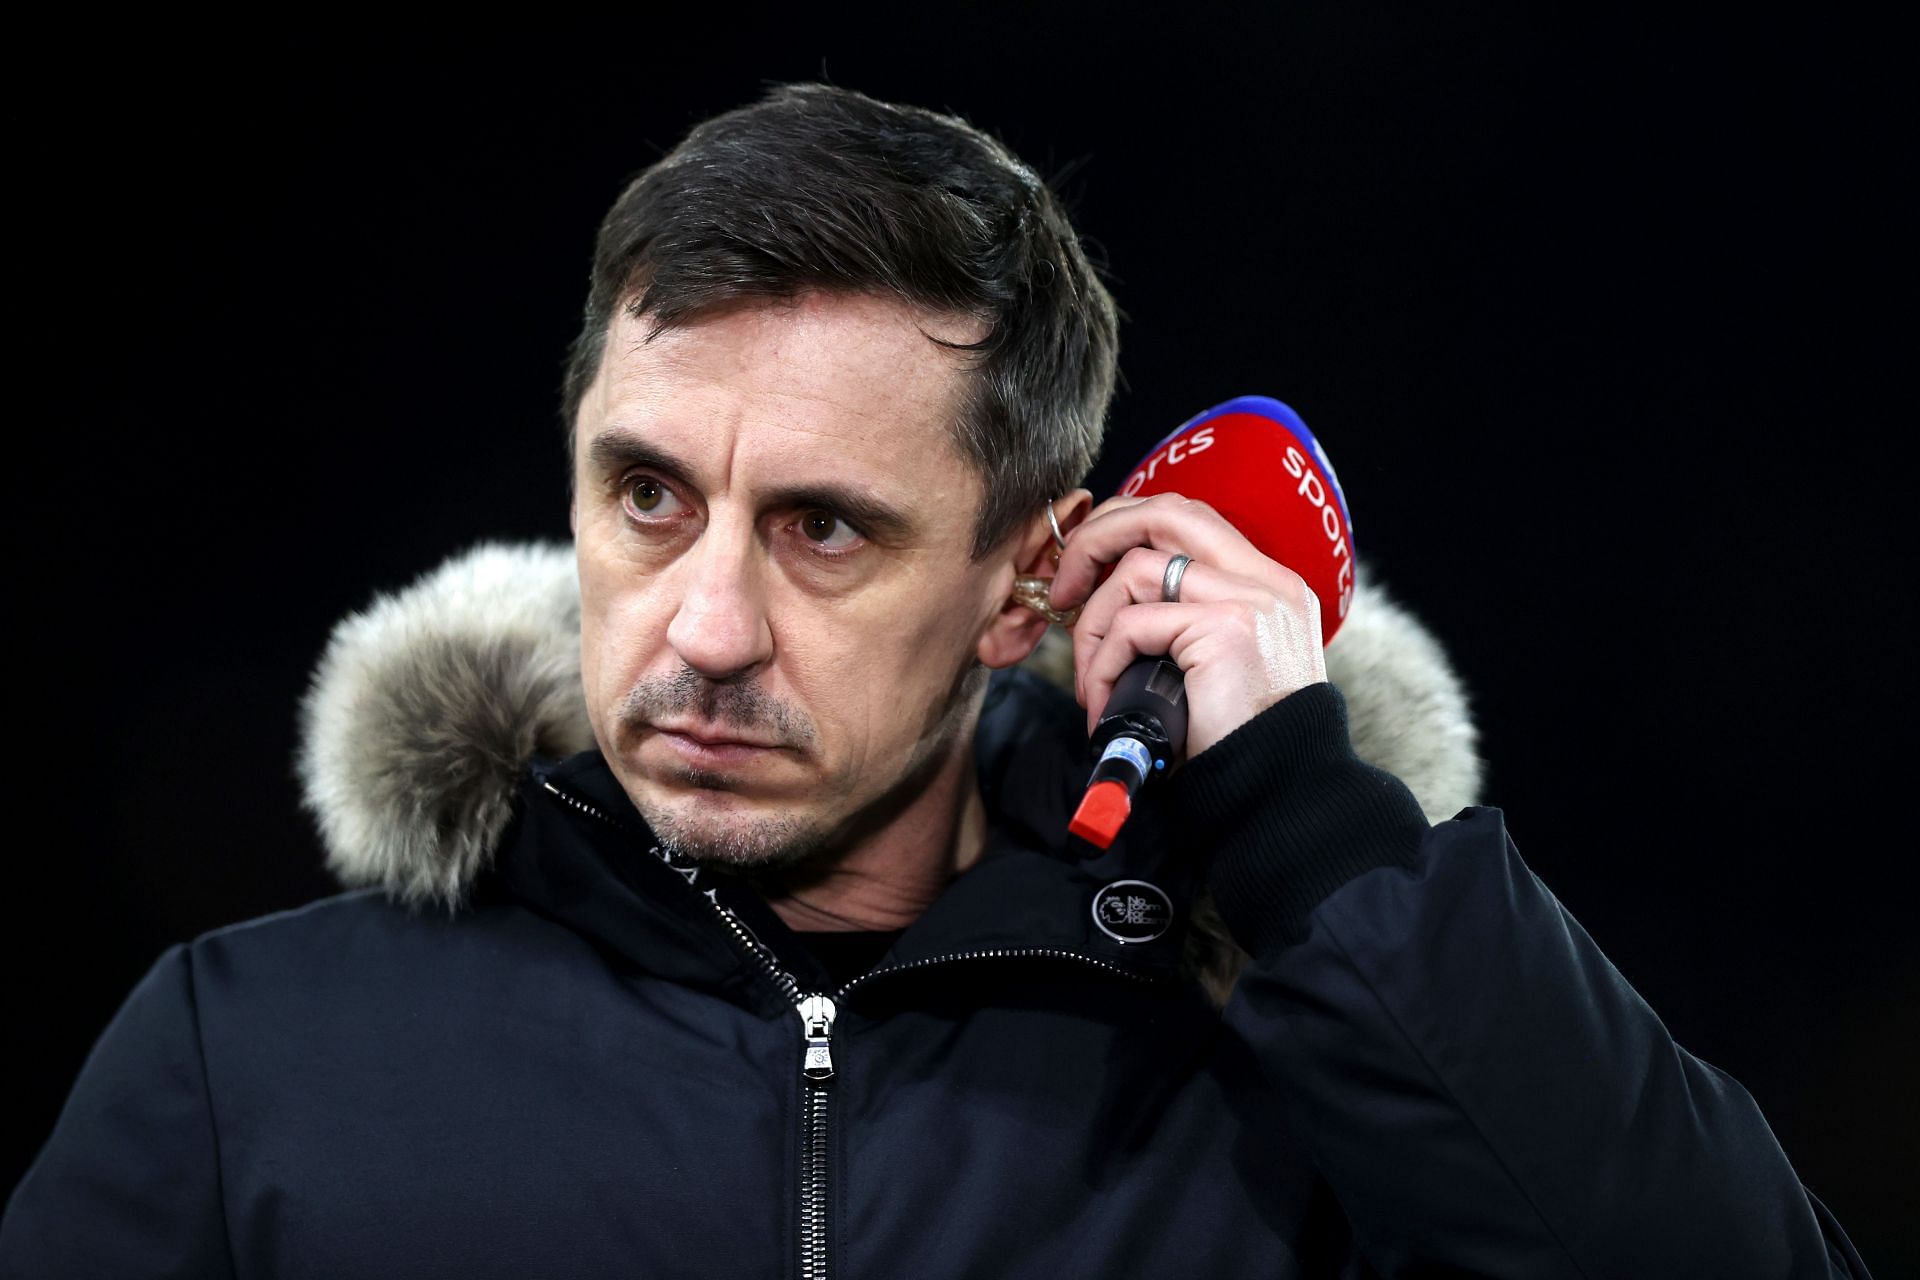 Gary Neville made some contentious remarks about Man United players recently